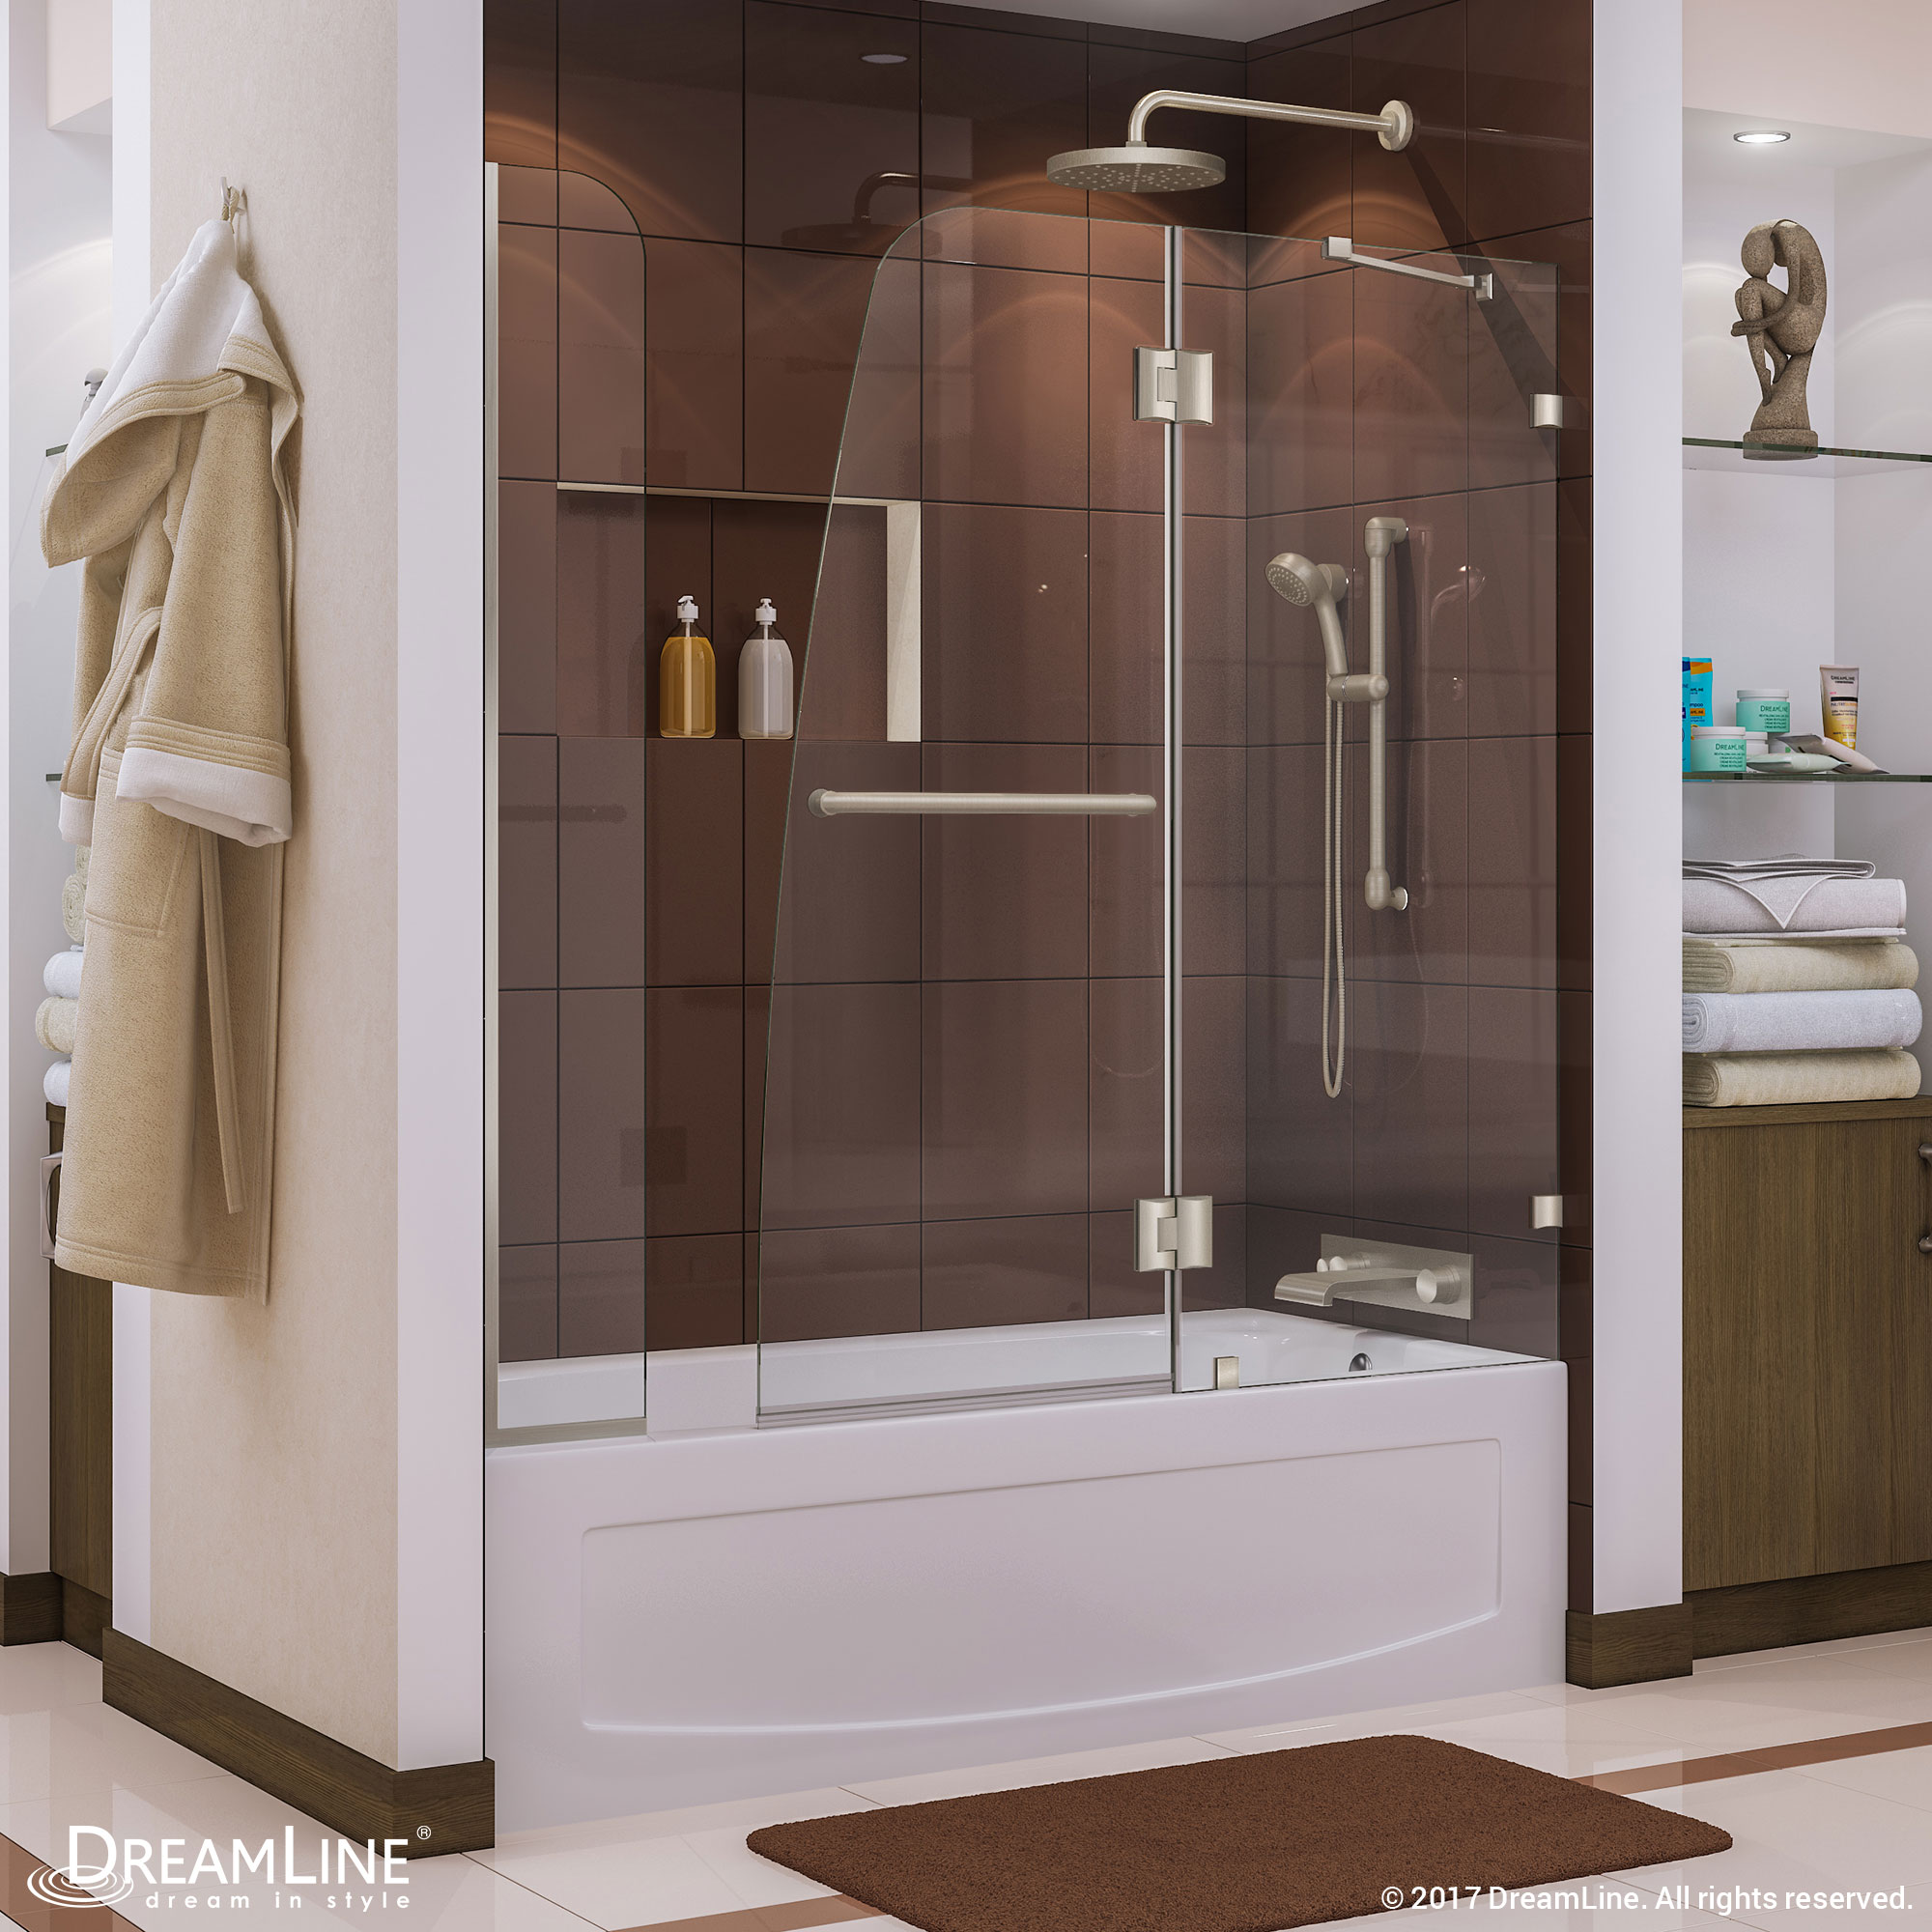 DreamLine Aqua Lux 56-60 in. W x 58 in. H Frameless Hinged Tub Door with Extender Panel in Chrome